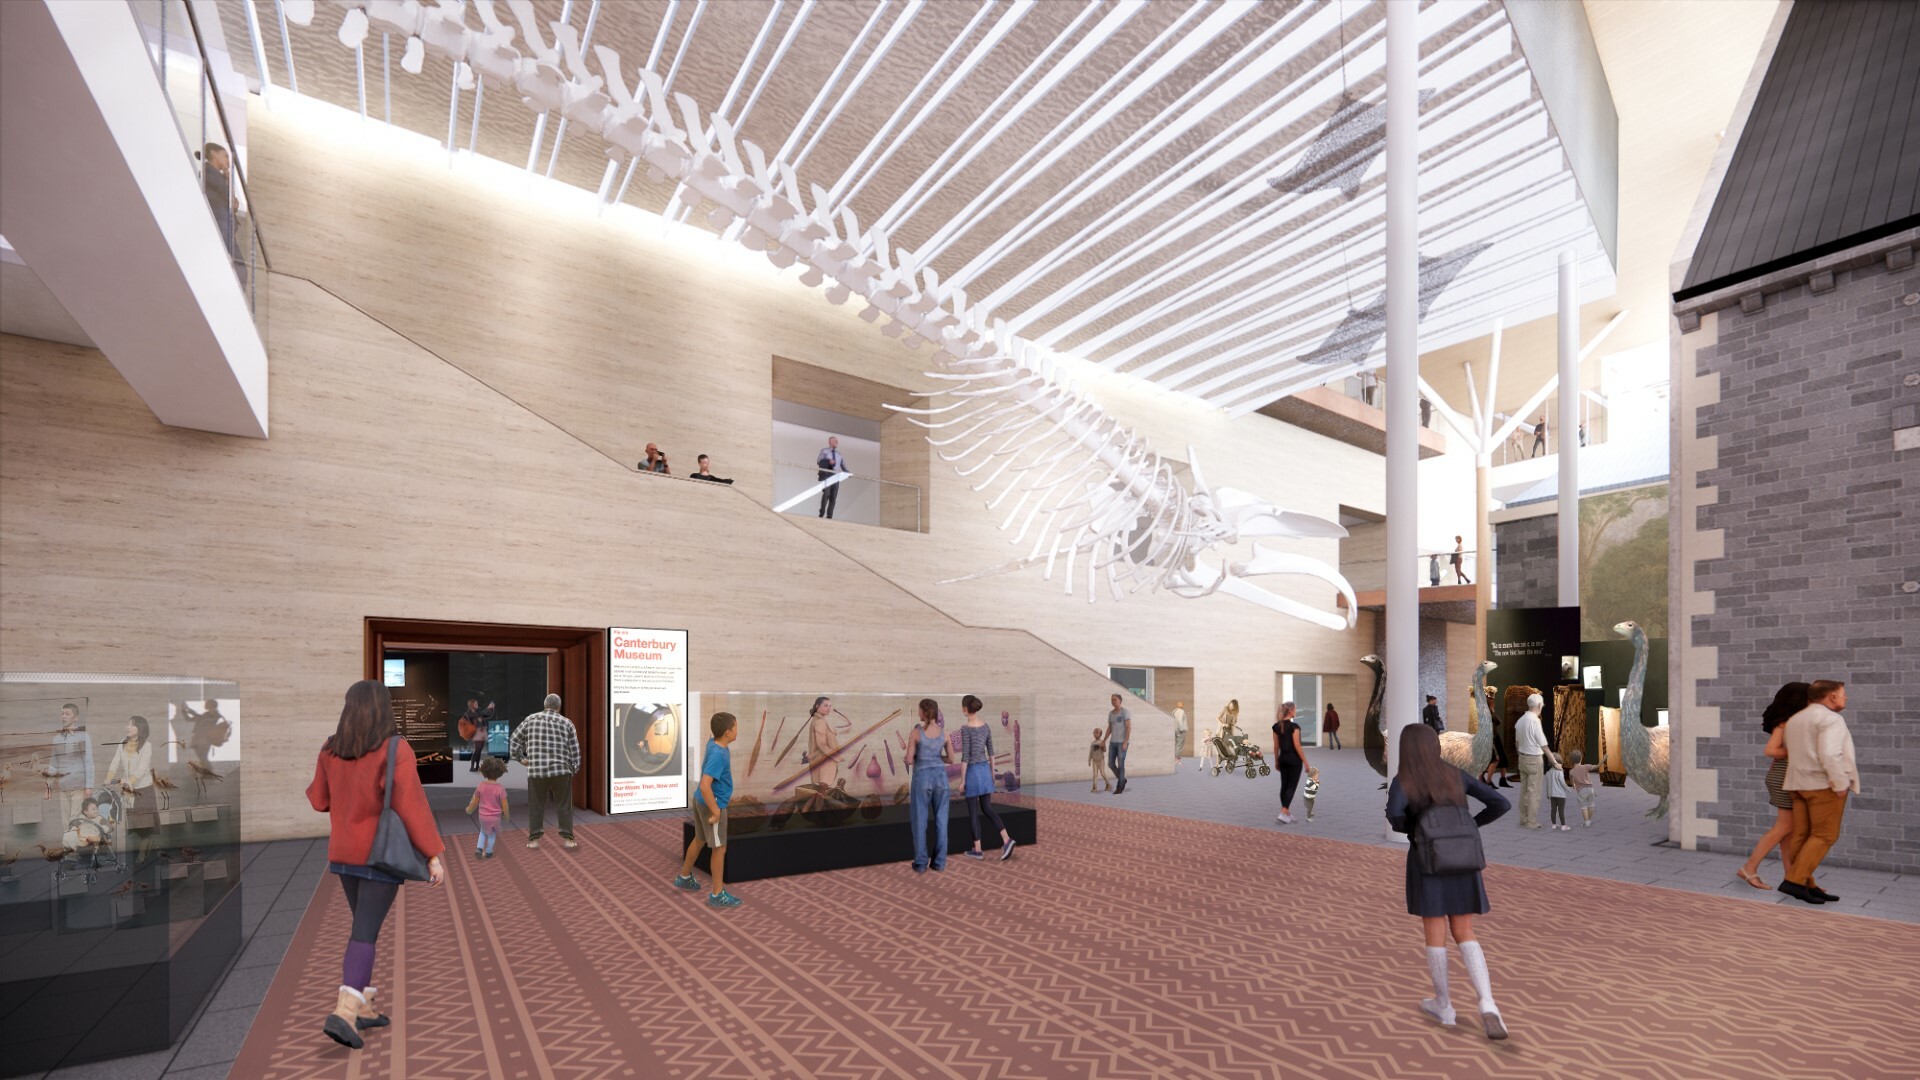 Architectural render showing the Museum's proposed new atrium space with the Ōkārito blue whale skeleton suspended from the ceiling. Image: Athfield Architects